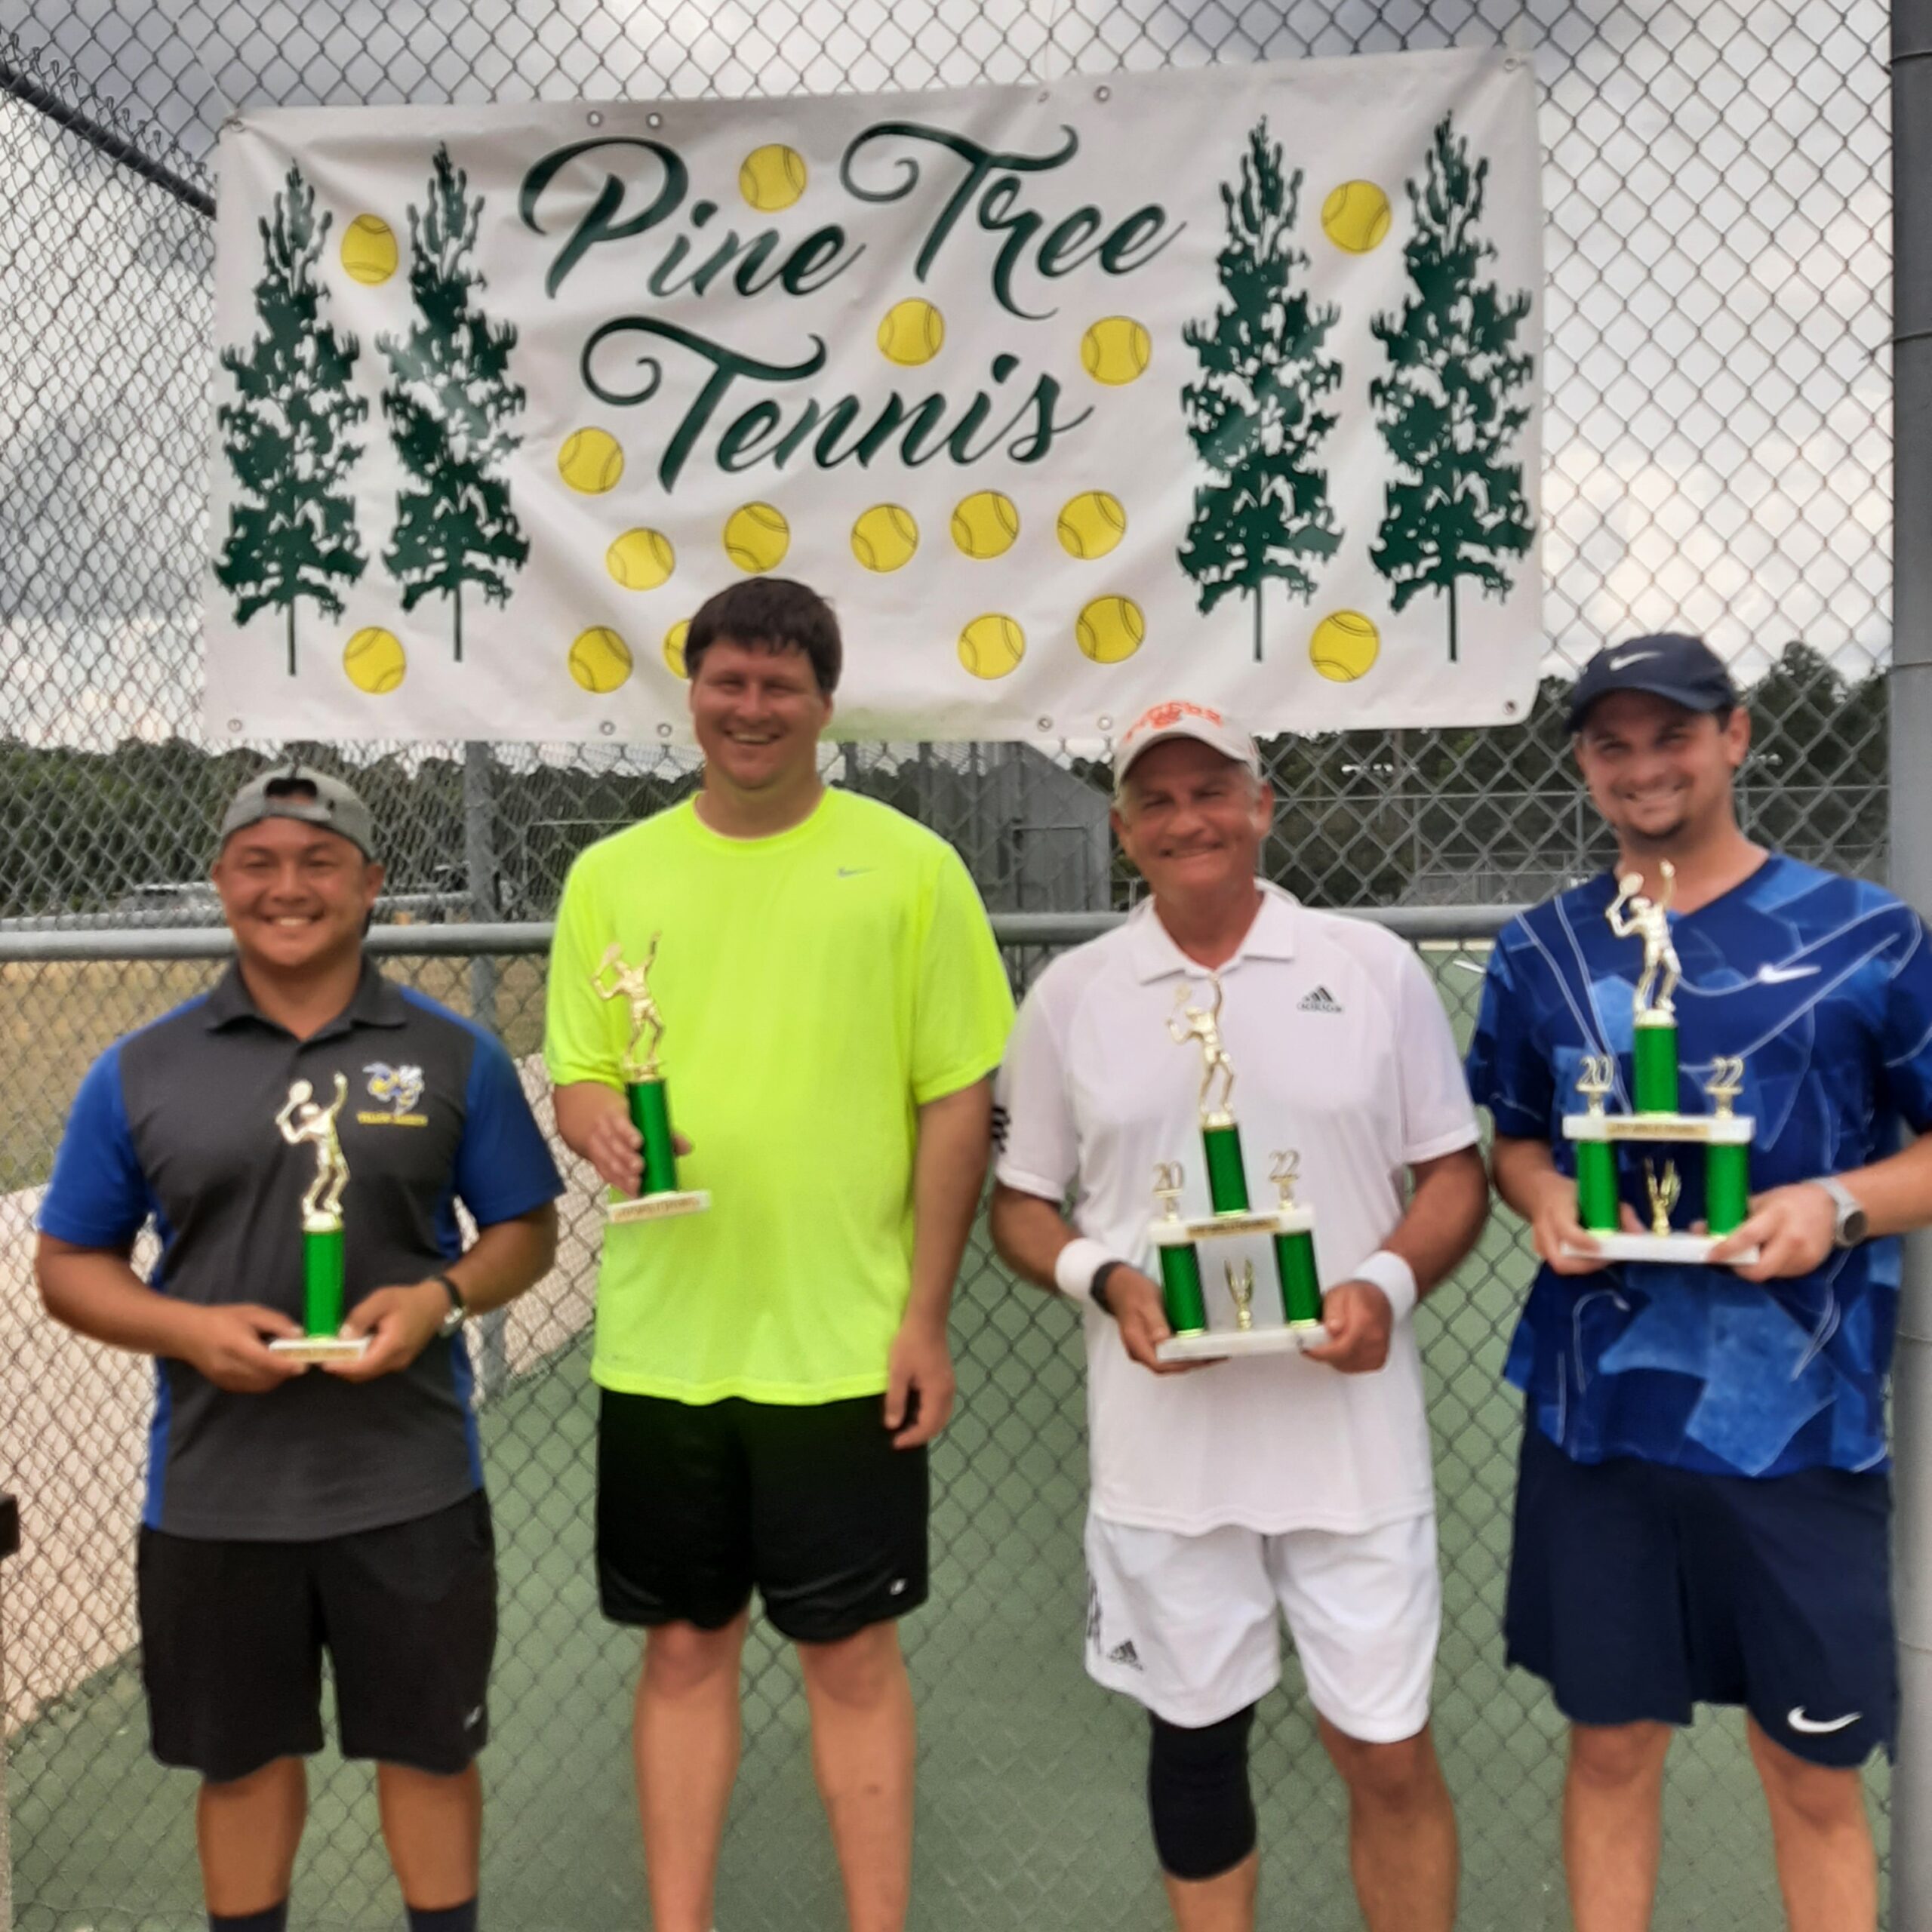  Pine Tree Festival Tennis Tournament Applications Available